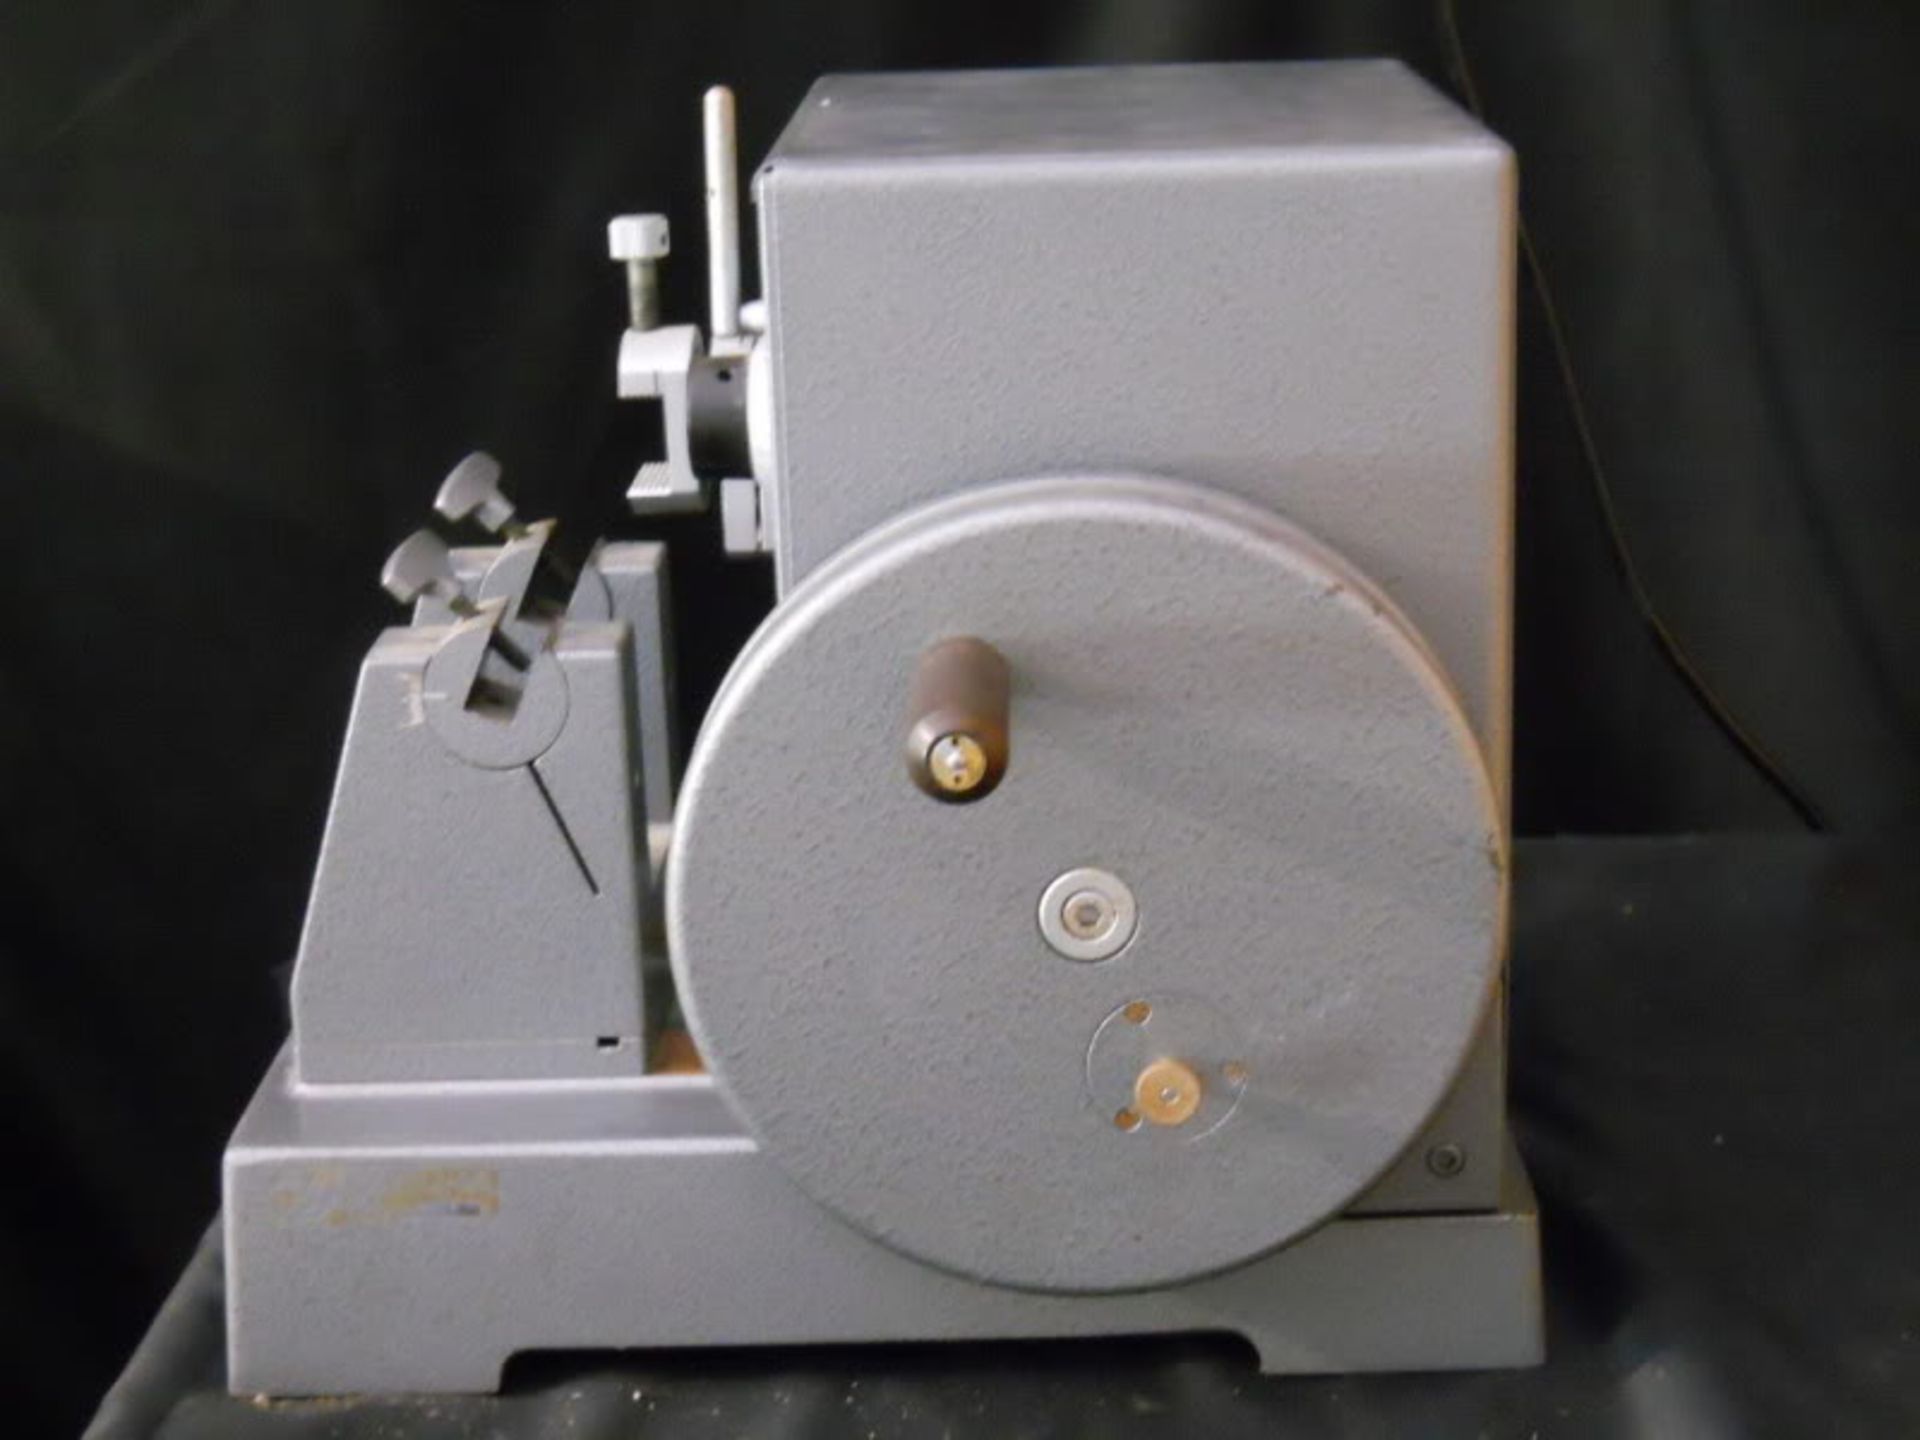 Leitz Wetzler Rotary Microtome Model 1212, Qty 1, 320935862239 - Image 4 of 4